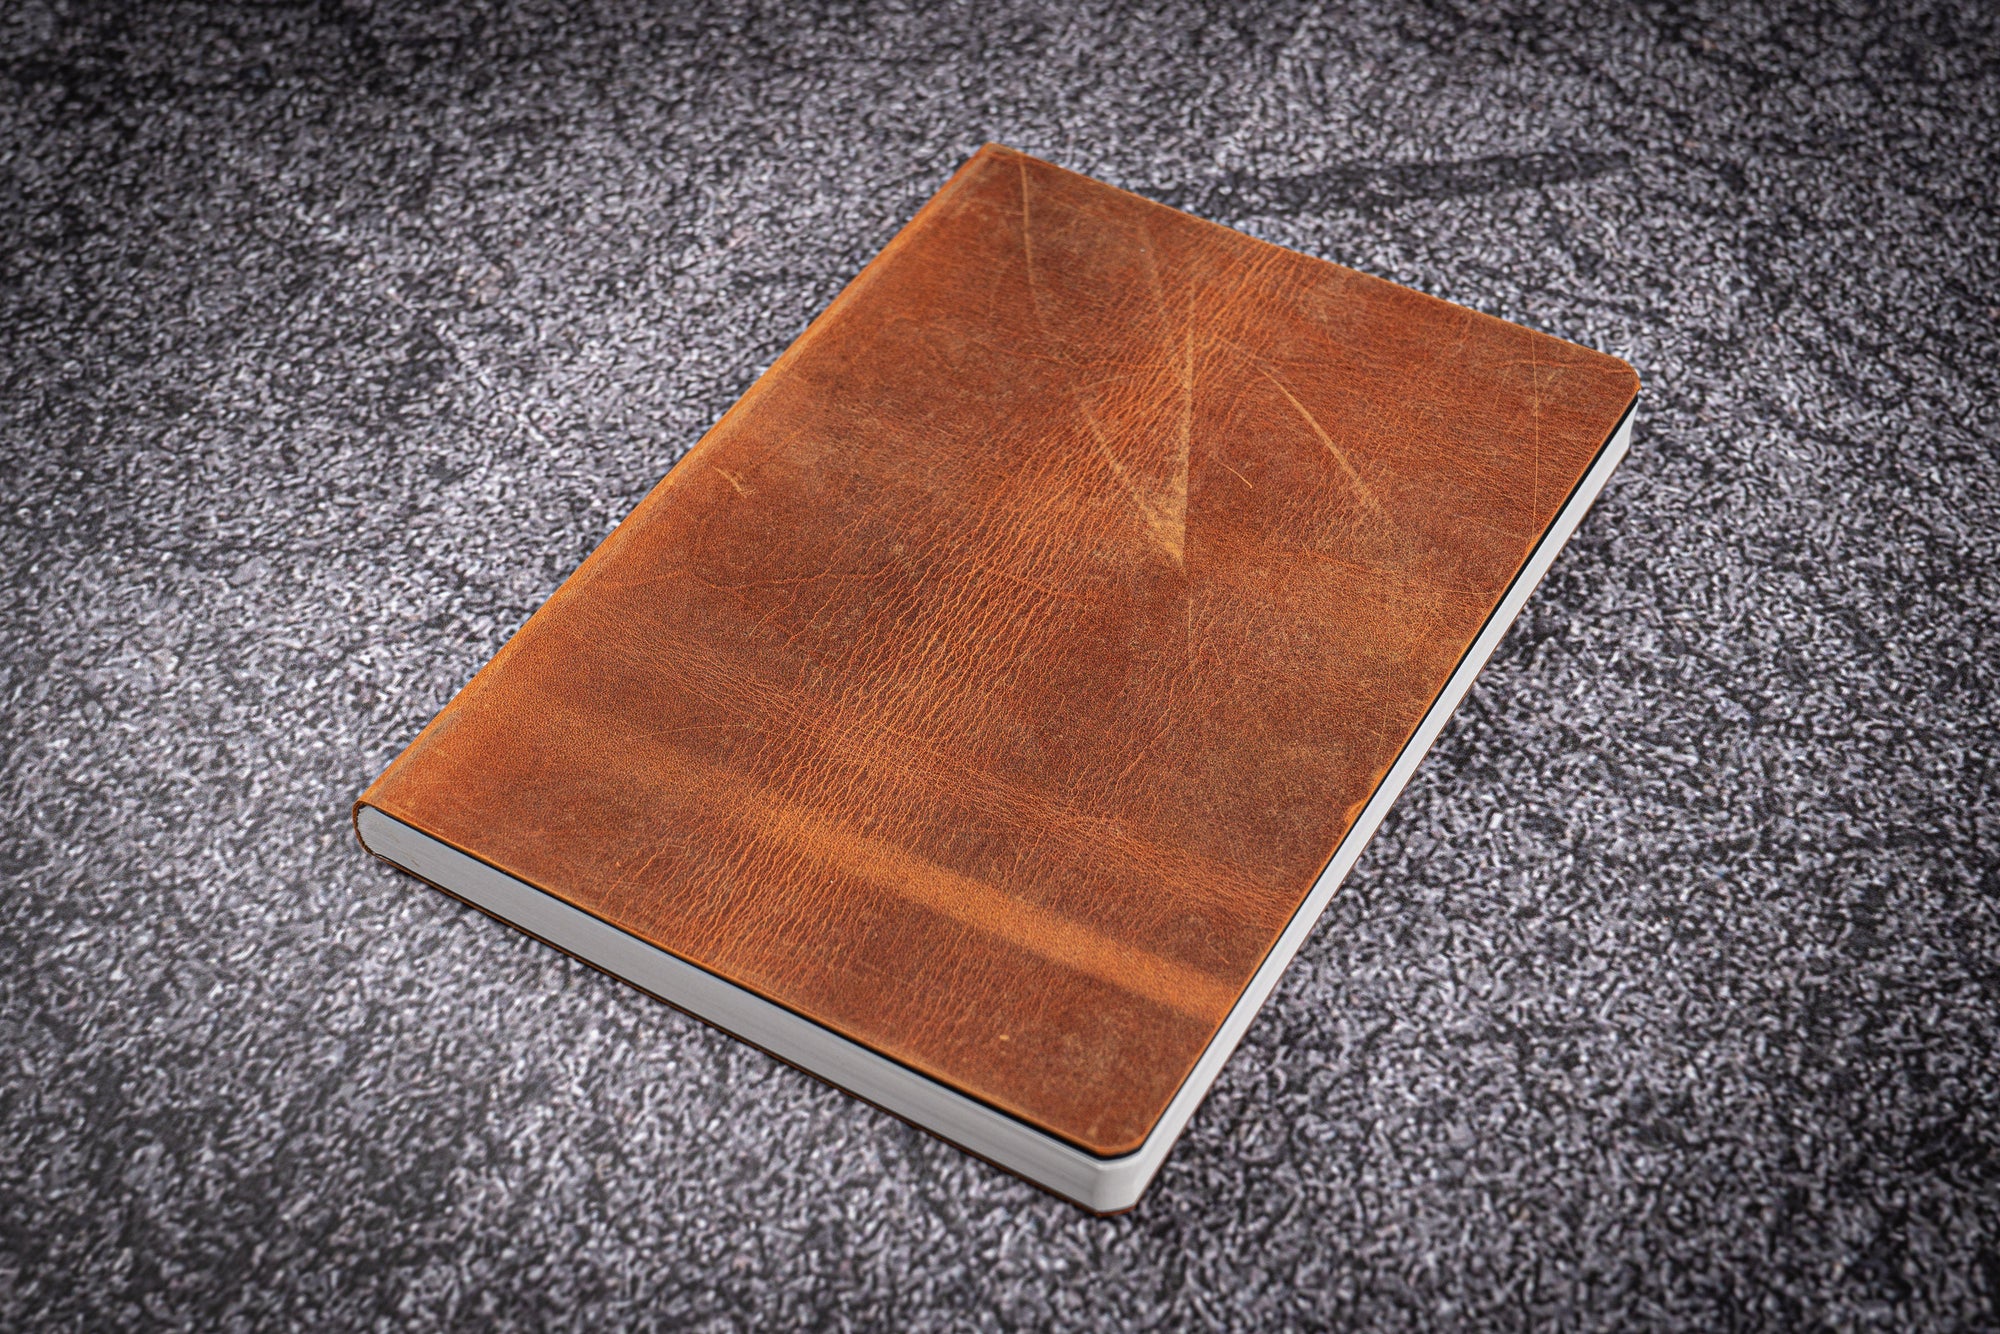 Leather Notebook - Handmade Leather Bound Notebooks Online - Galen Leather